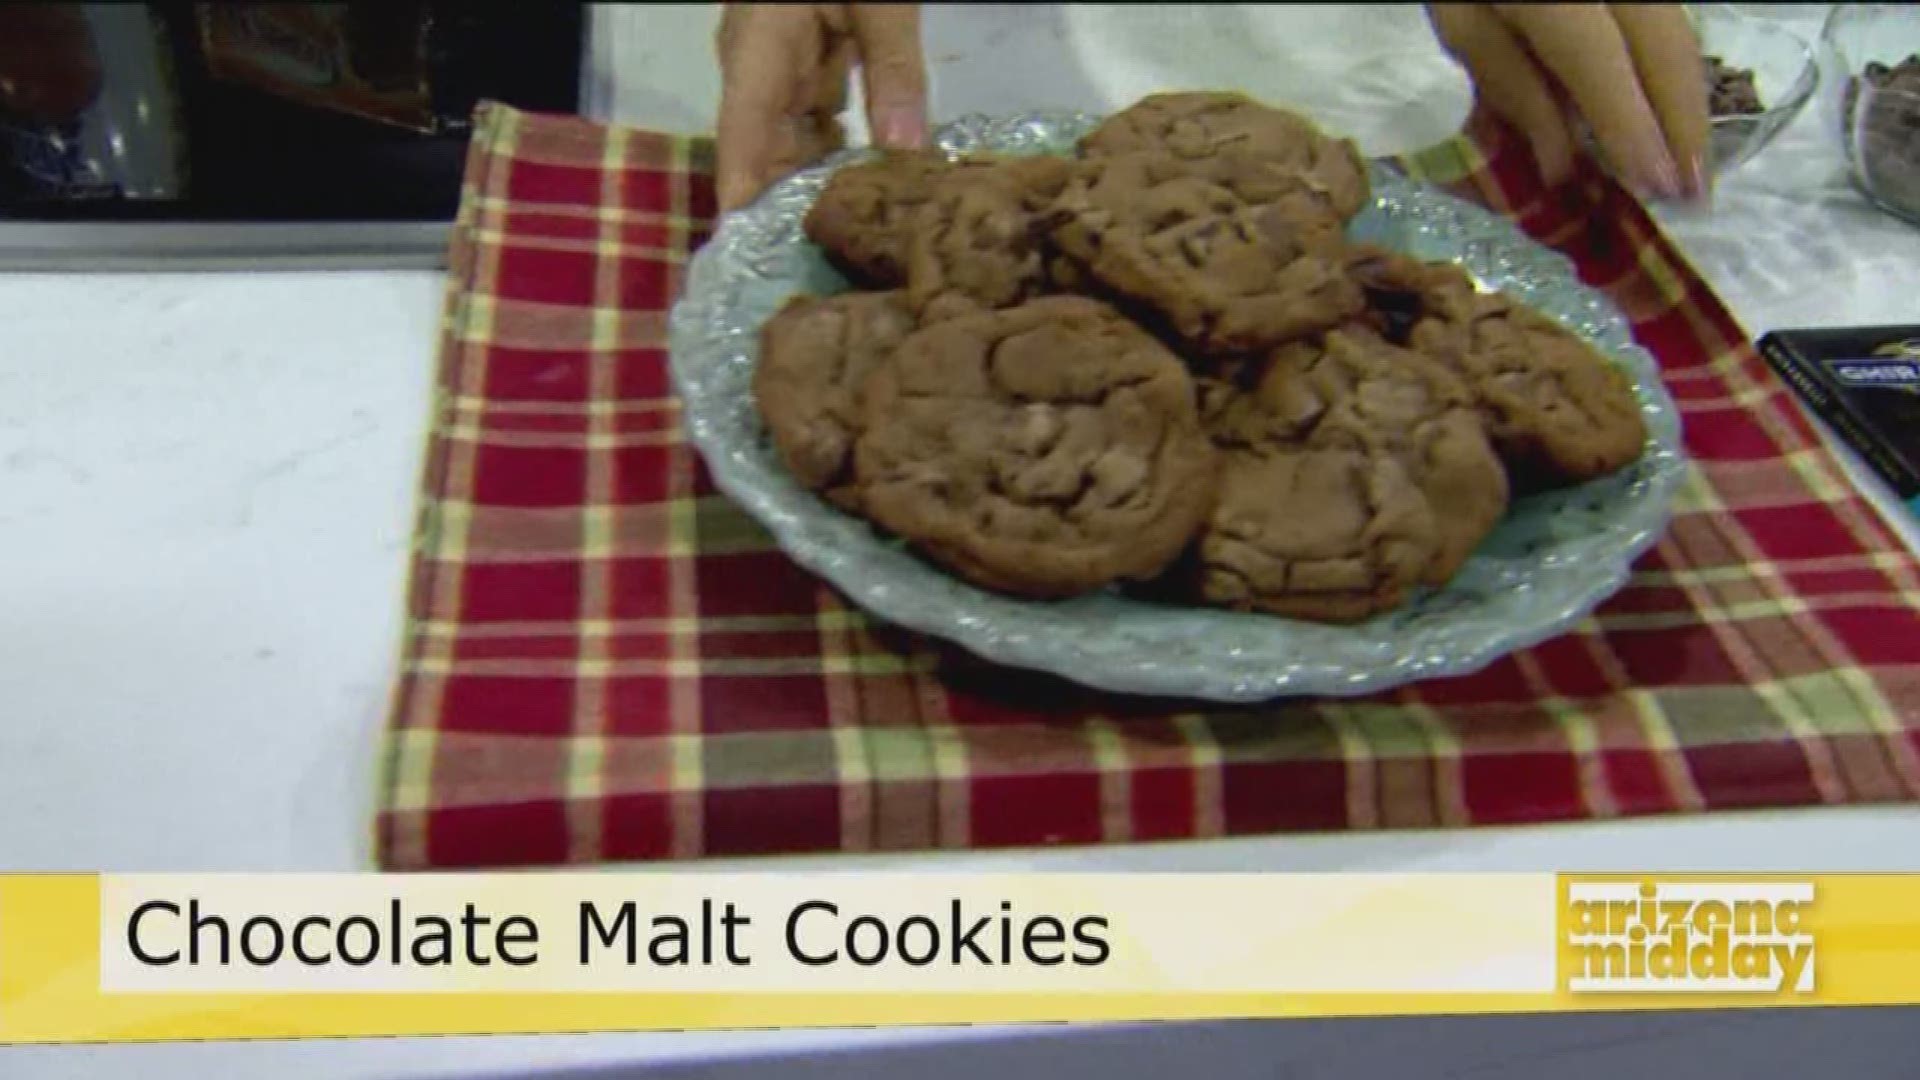 Jan shares KEZ 99.9's Beth McDonald's favorite cookie recipe and how easy they are to make!